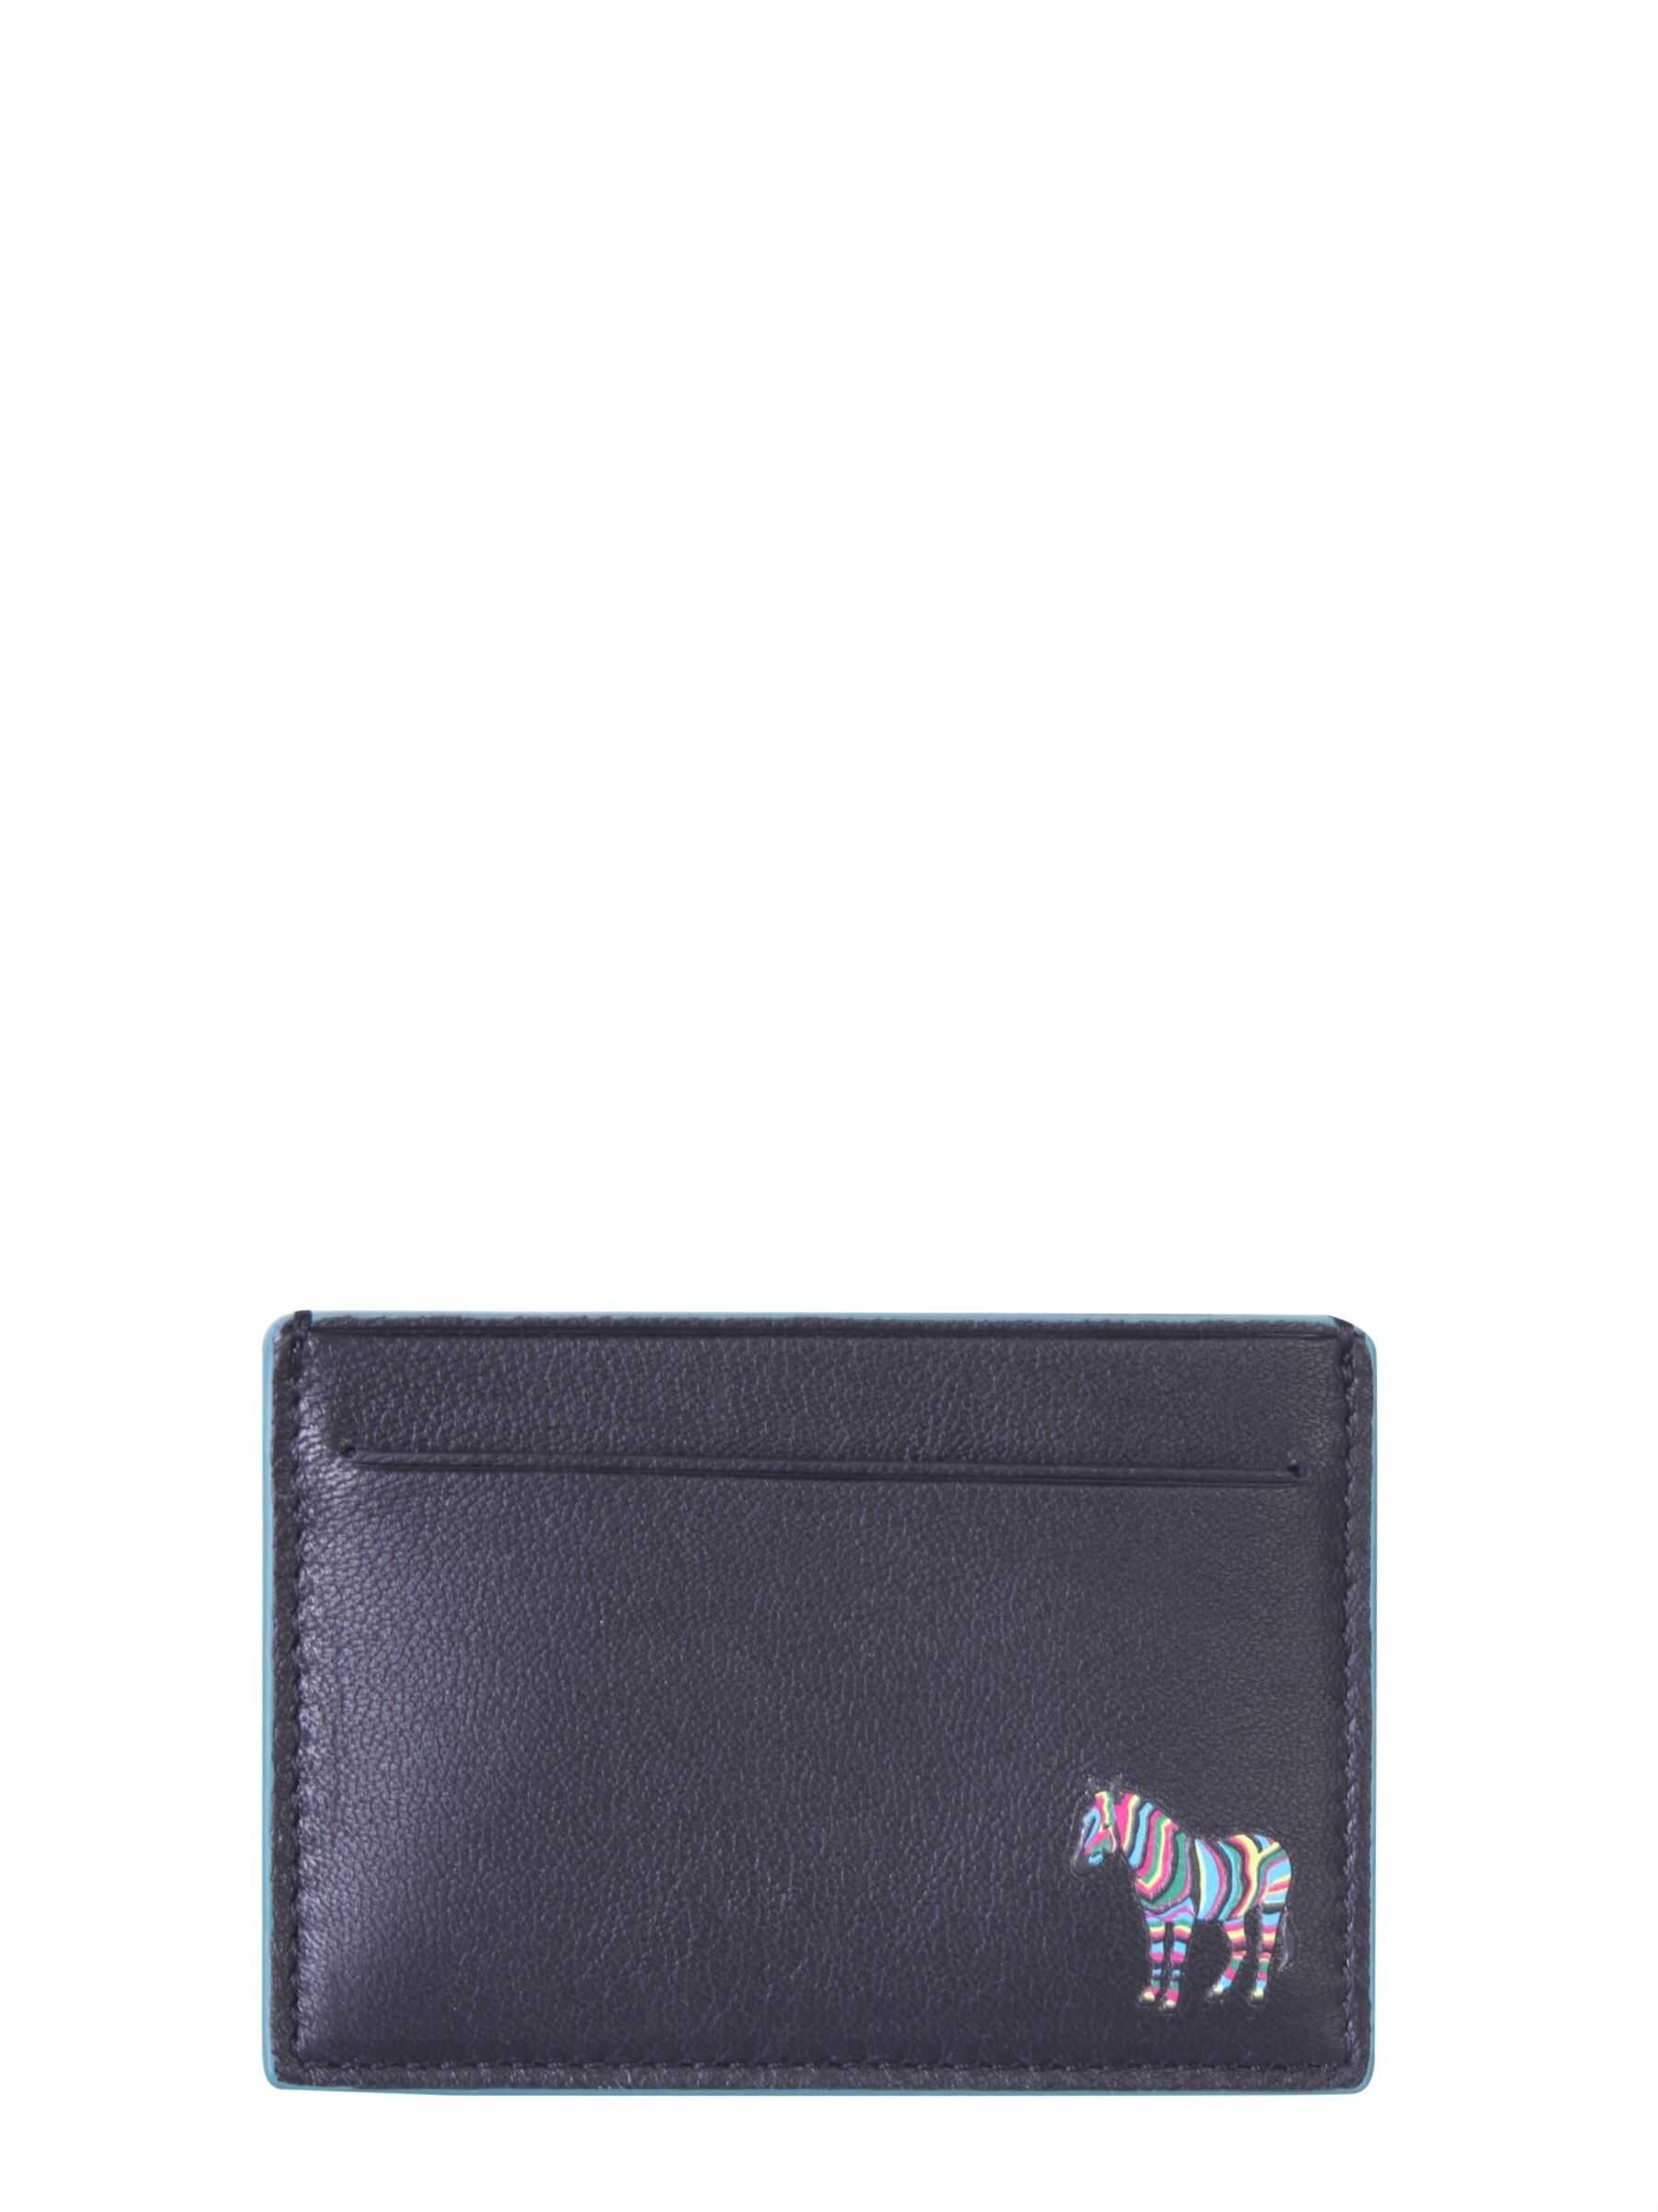 PS by Paul Smith Leather Card Holder BLACK